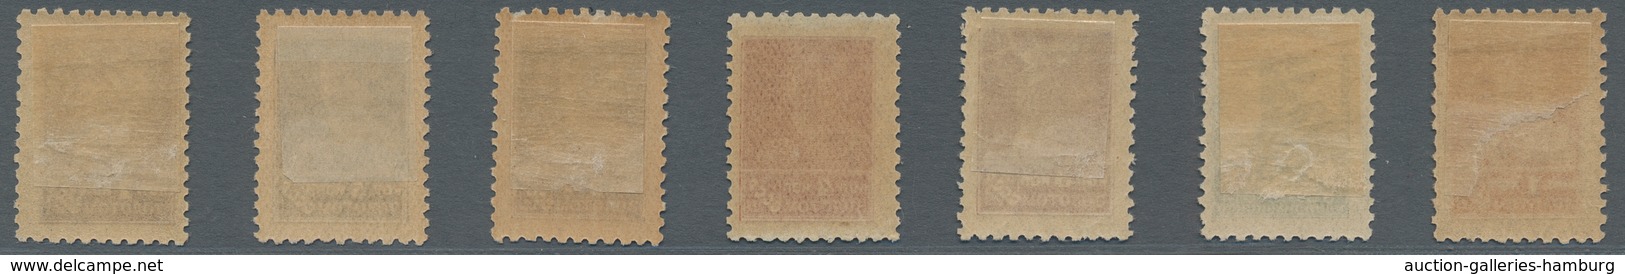 Sowjetunion: 1924, "definitives with perforation 12", mint hinged set or the peaks at 8 cop. or 1 rb